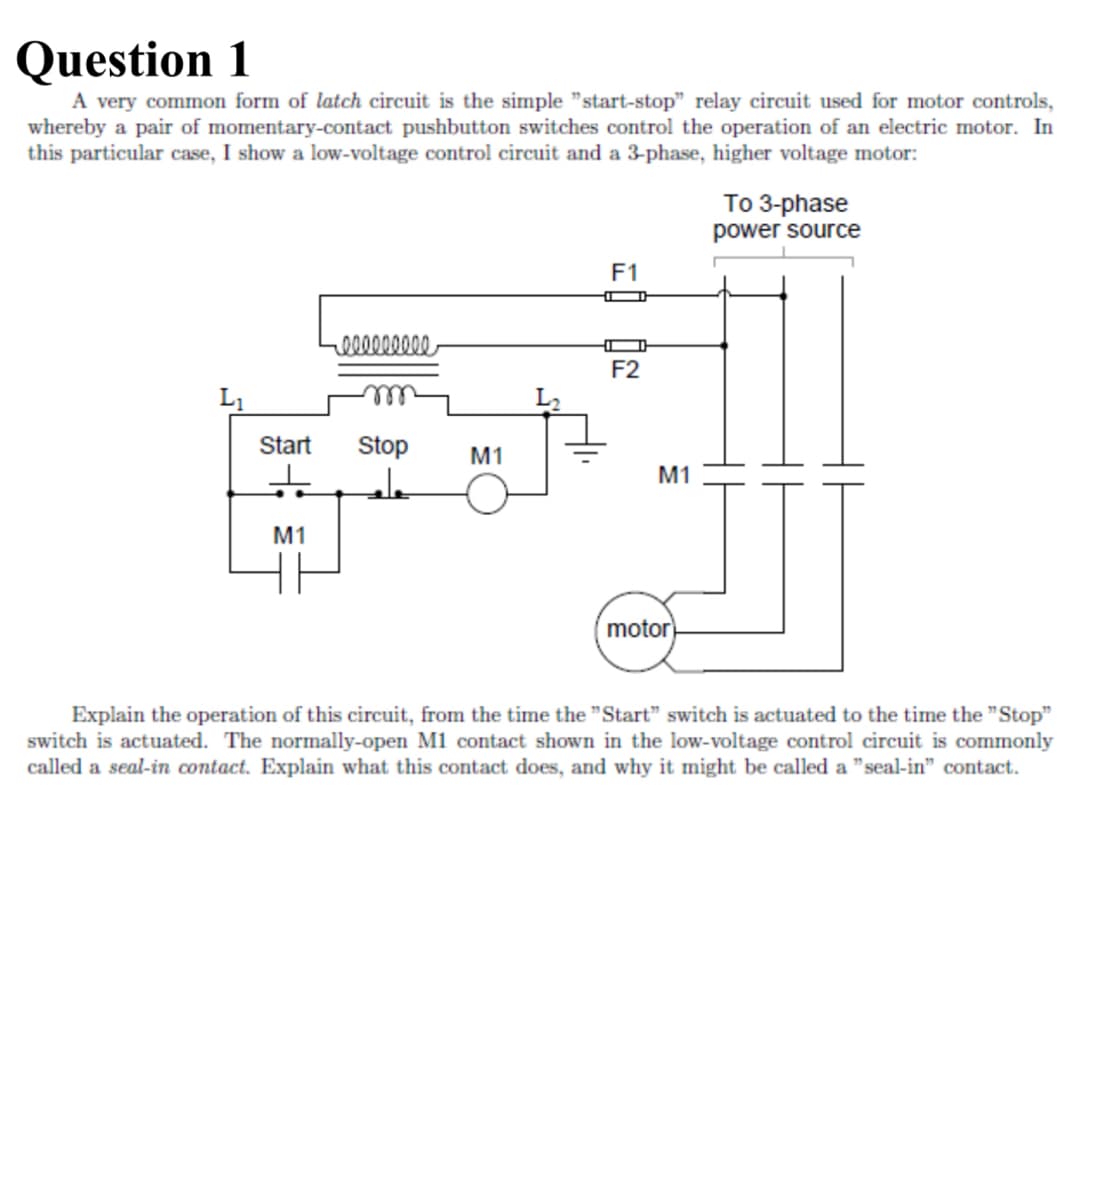 Question 1
A very common form of latch circuit is the simple "start-stop" relay circuit used for motor controls,
whereby a pair of momentary-contact pushbutton switches control the operation of an electric motor. In
this particular case, I show a low-voltage control circuit and a 3-phase, higher voltage motor:
lllllllll
To 3-phase
power source
F1
F2
L1
Start
Stop
M1
M1
M1
motor
Explain the operation of this circuit, from the time the "Start" switch is actuated to the time the "Stop"
switch is actuated. The normally-open M1 contact shown in the low-voltage control circuit is commonly
called a seal-in contact. Explain what this contact does, and why it might be called a "seal-in" contact.